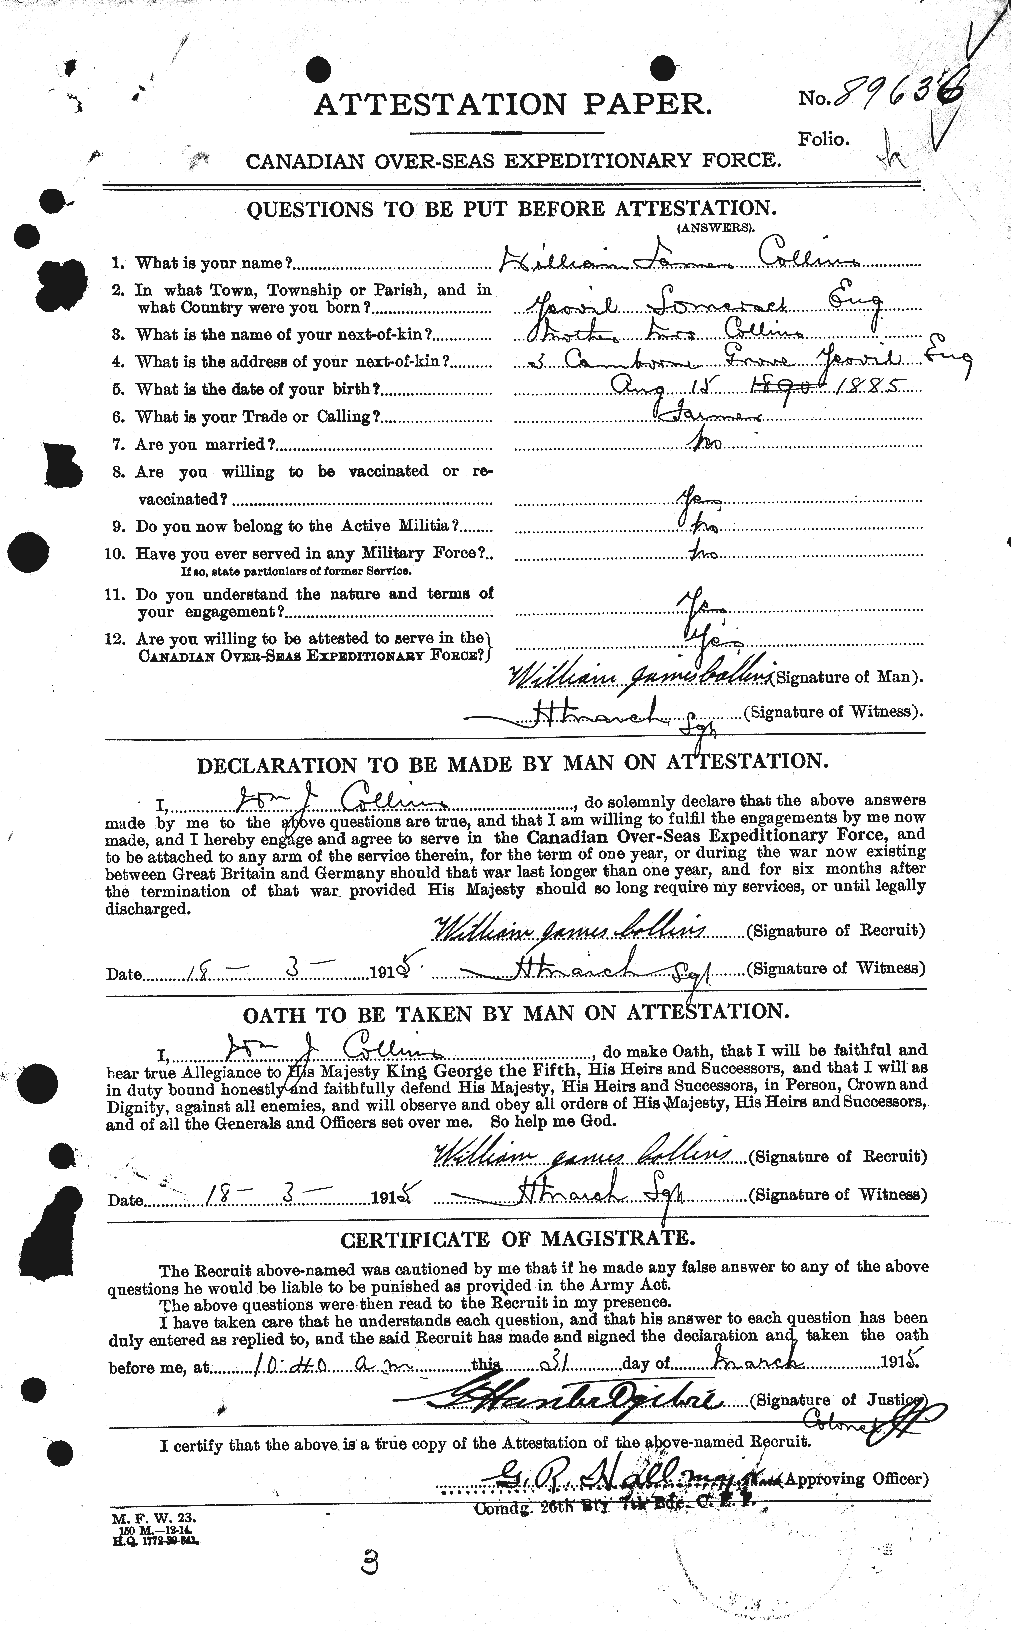 Personnel Records of the First World War - CEF 068514a